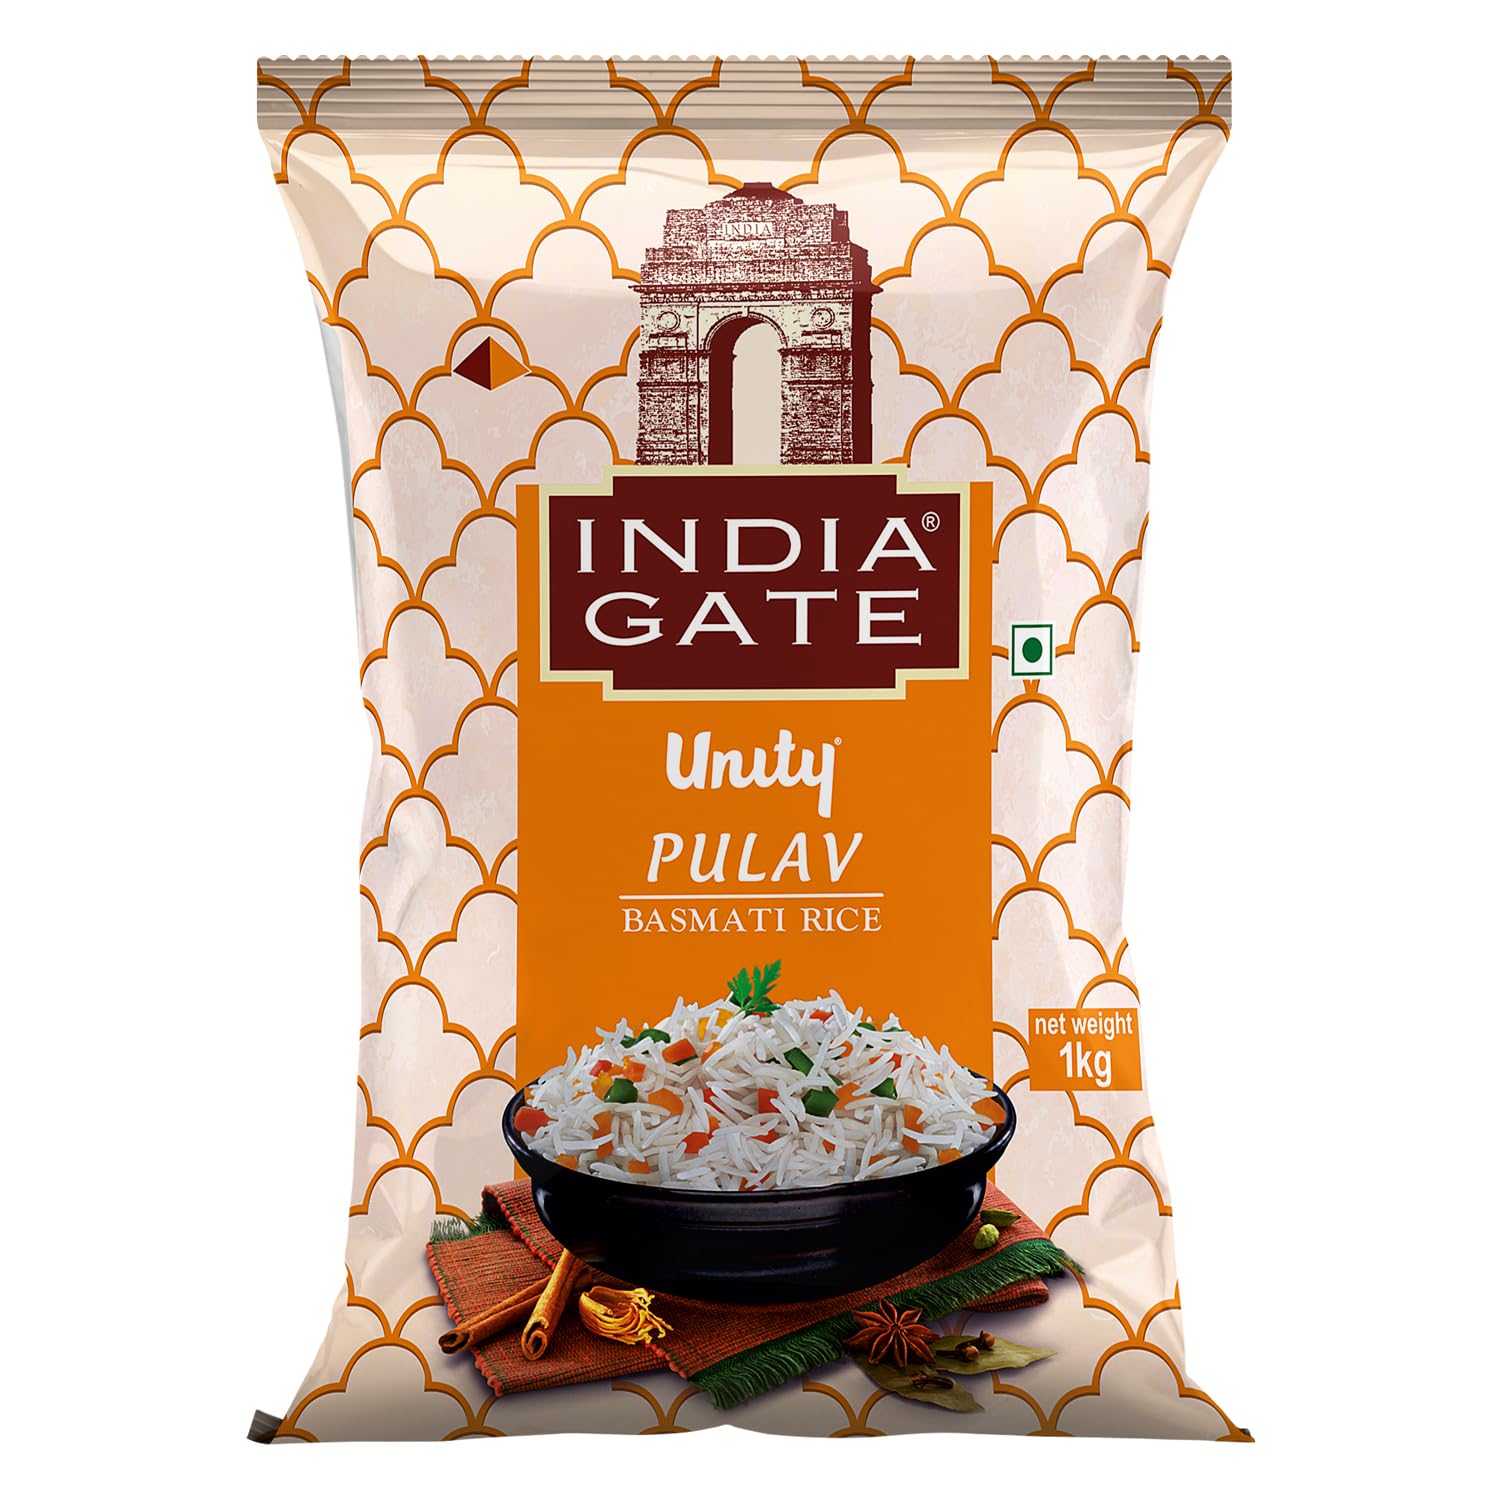 UNITY PULAV Basmati Rice (from the House of India Gate) 1kg Pack